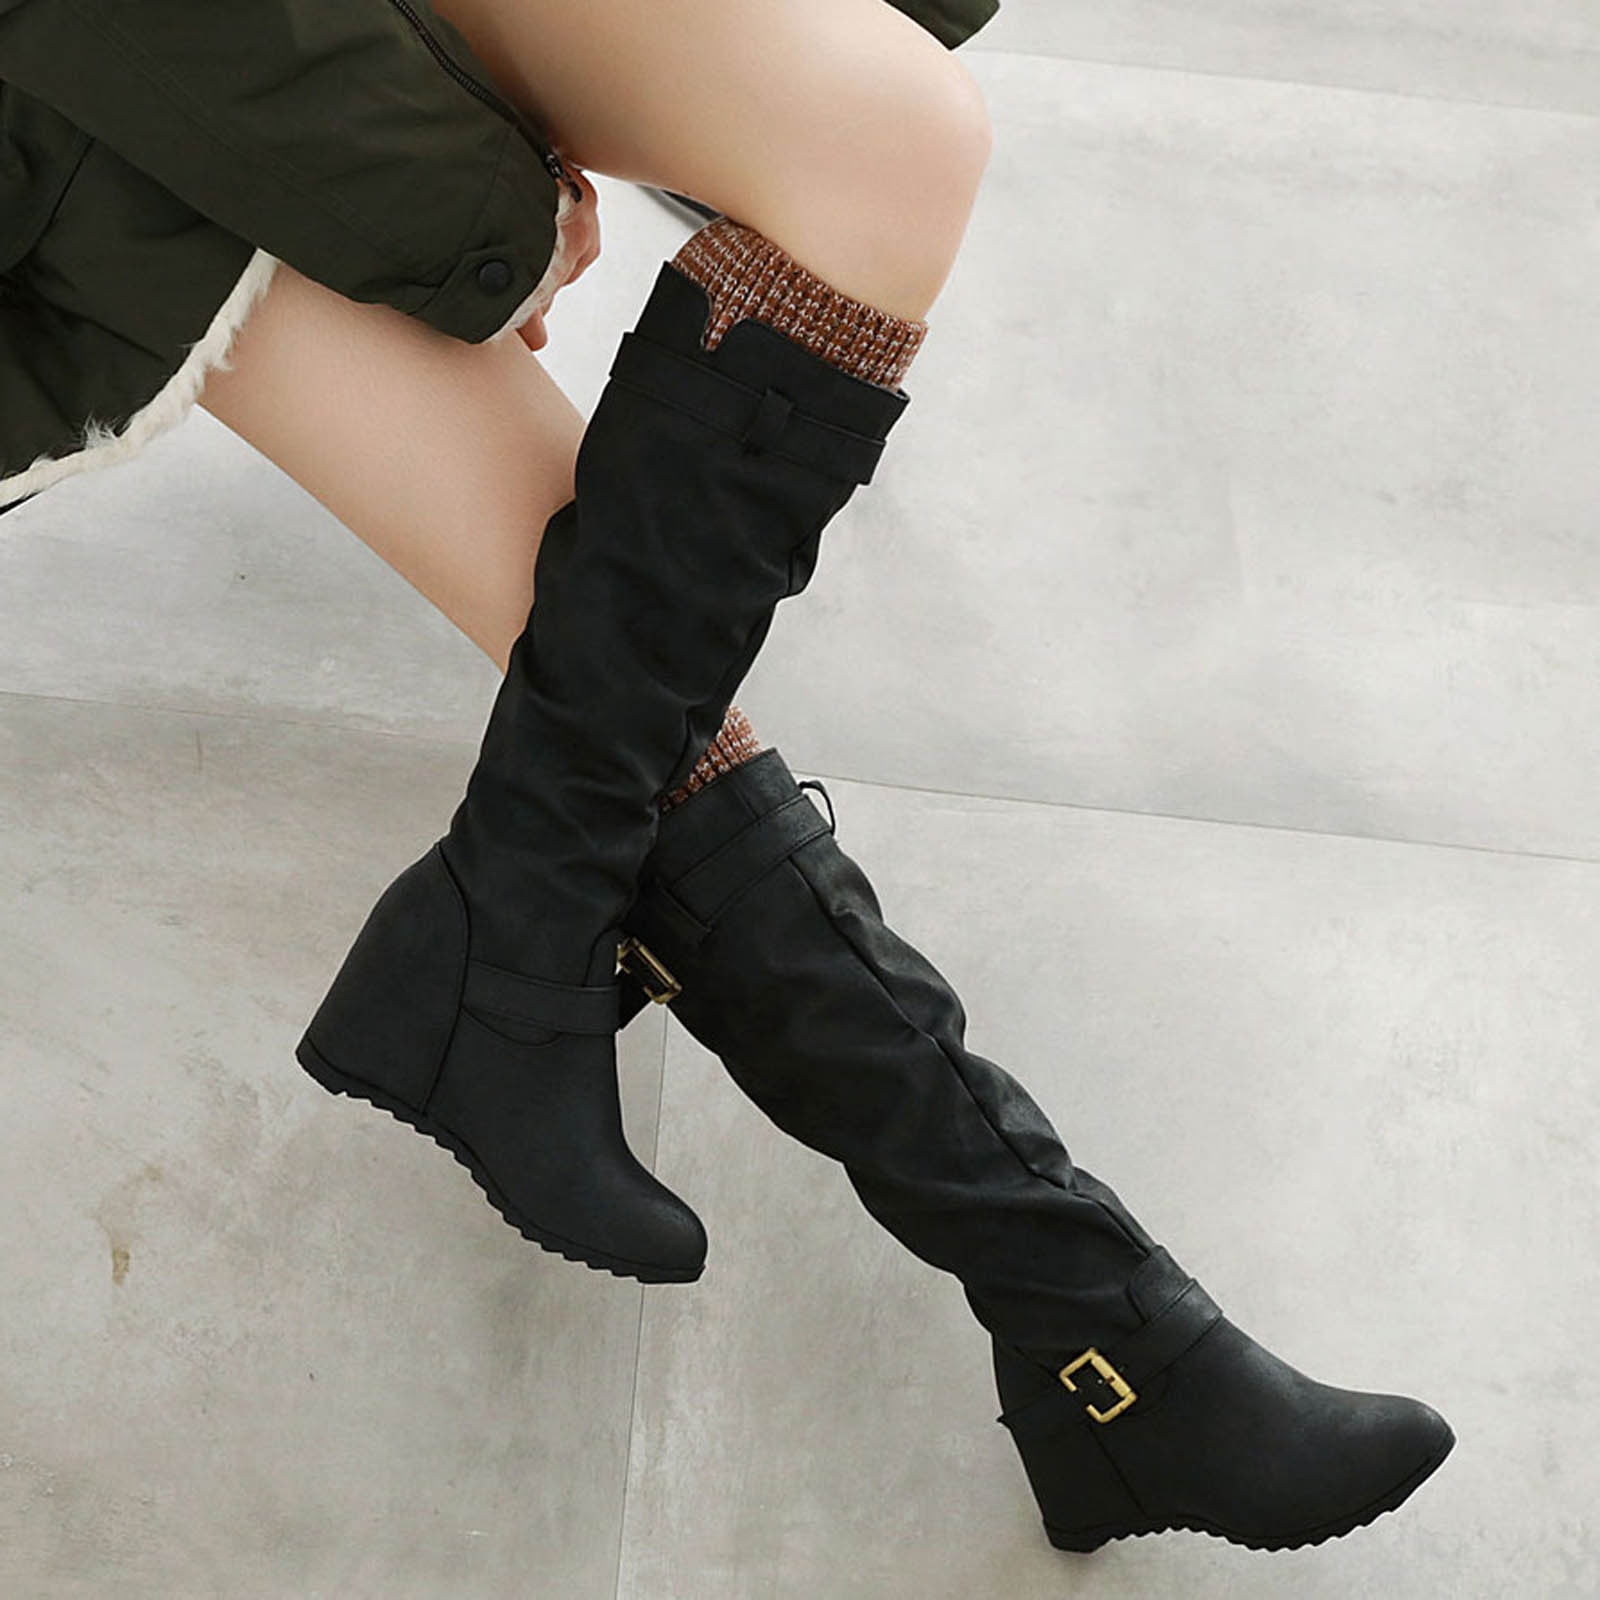 Women Shoes Round Toe Over the Knee Boots Chunky Heel Winter long Boots Black 